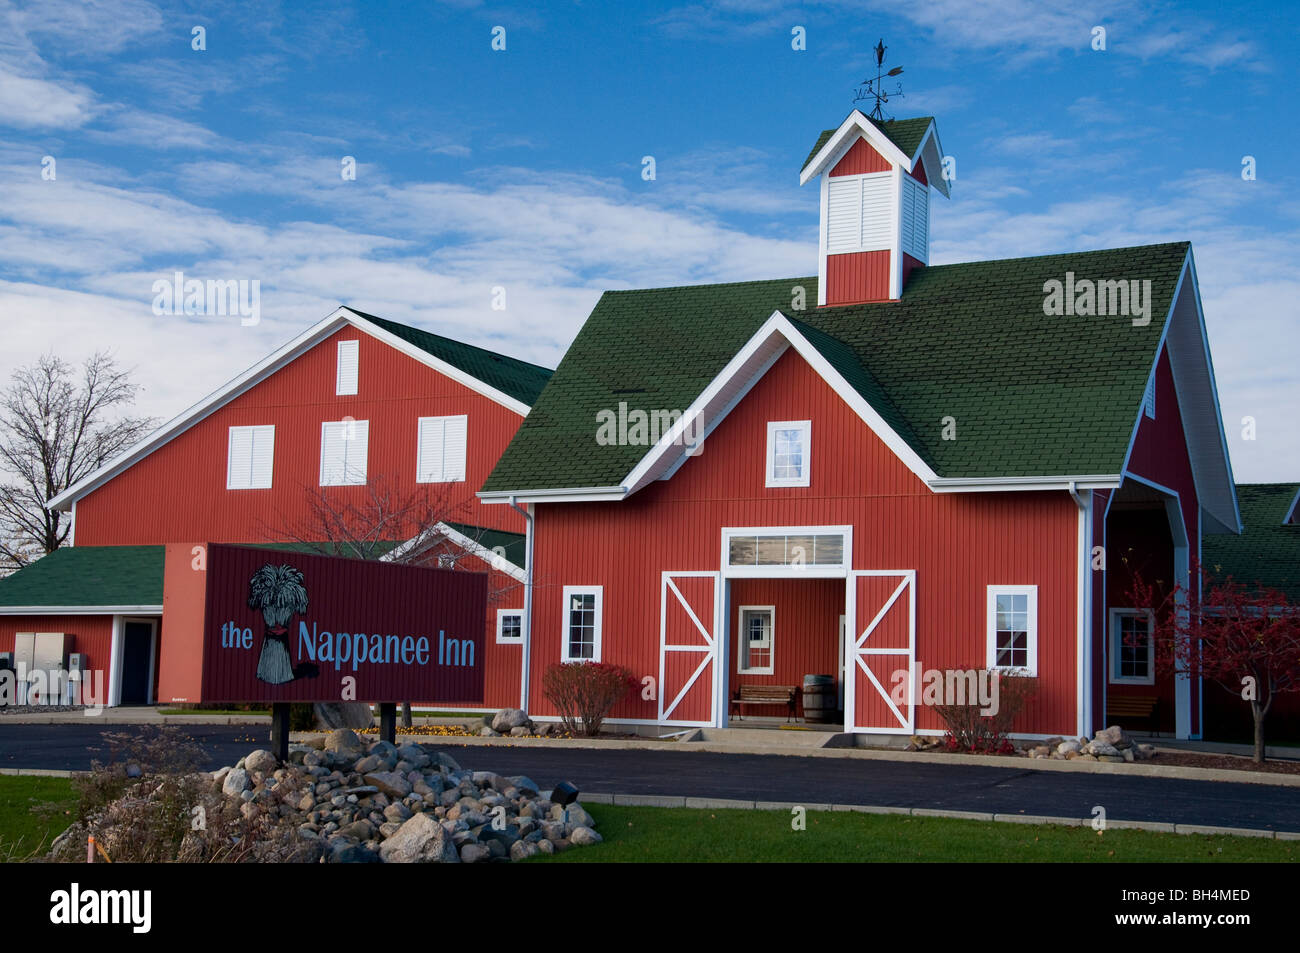 The Nappanee Inn near Amish Acres in Nappanee, Indiana, a Heritage Resort and Historic Farm which shows the Amish way of life. Stock Photo